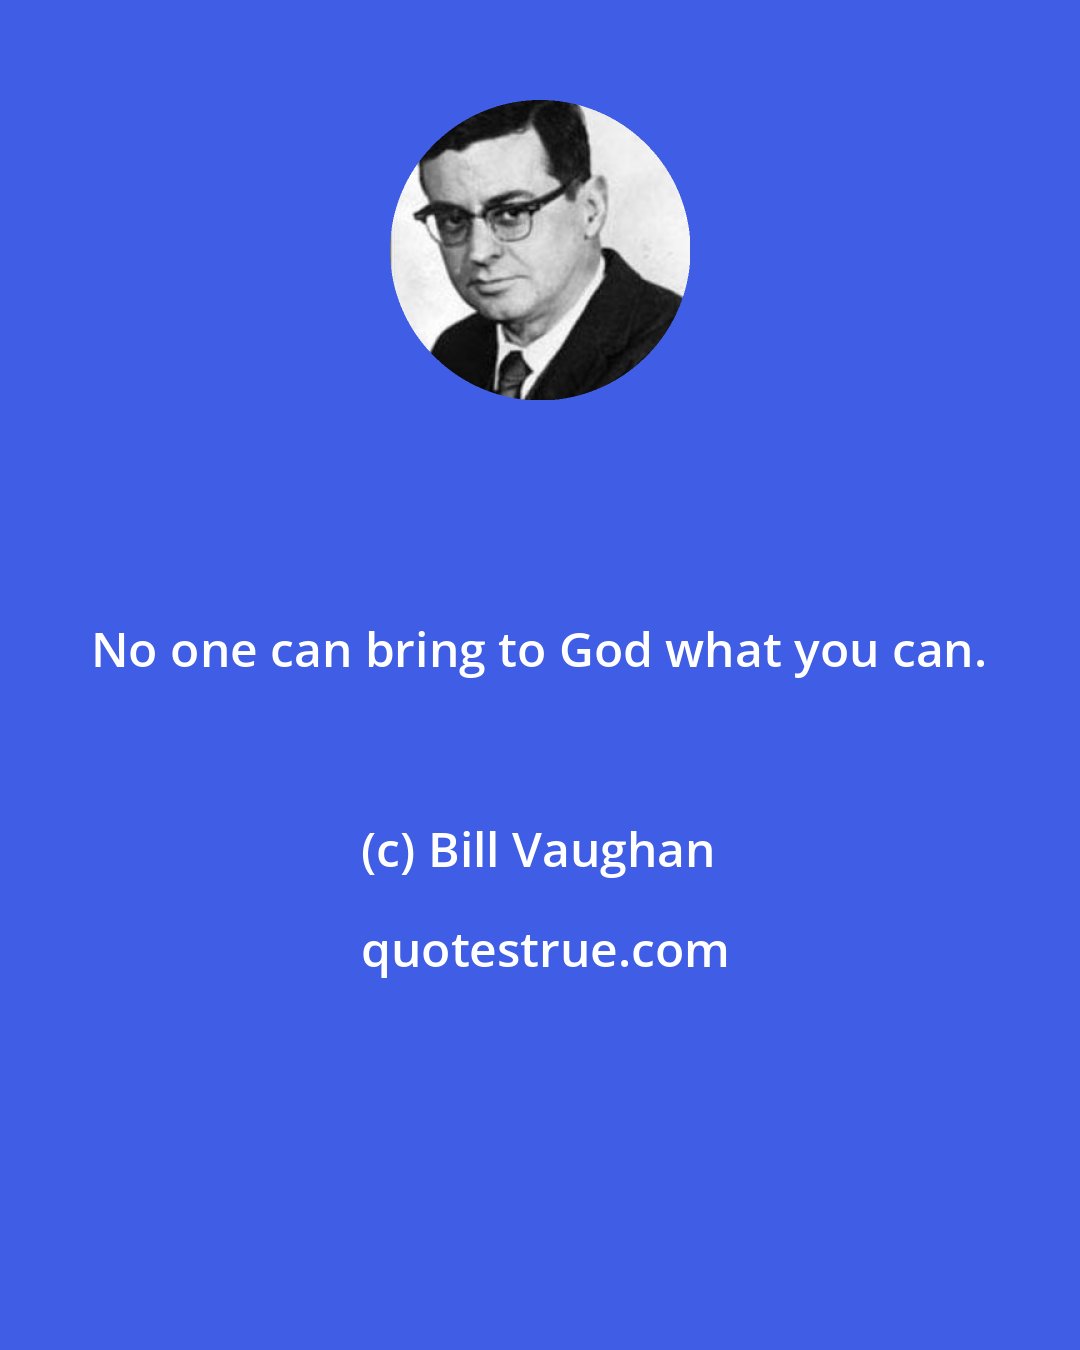 Bill Vaughan: No one can bring to God what you can.